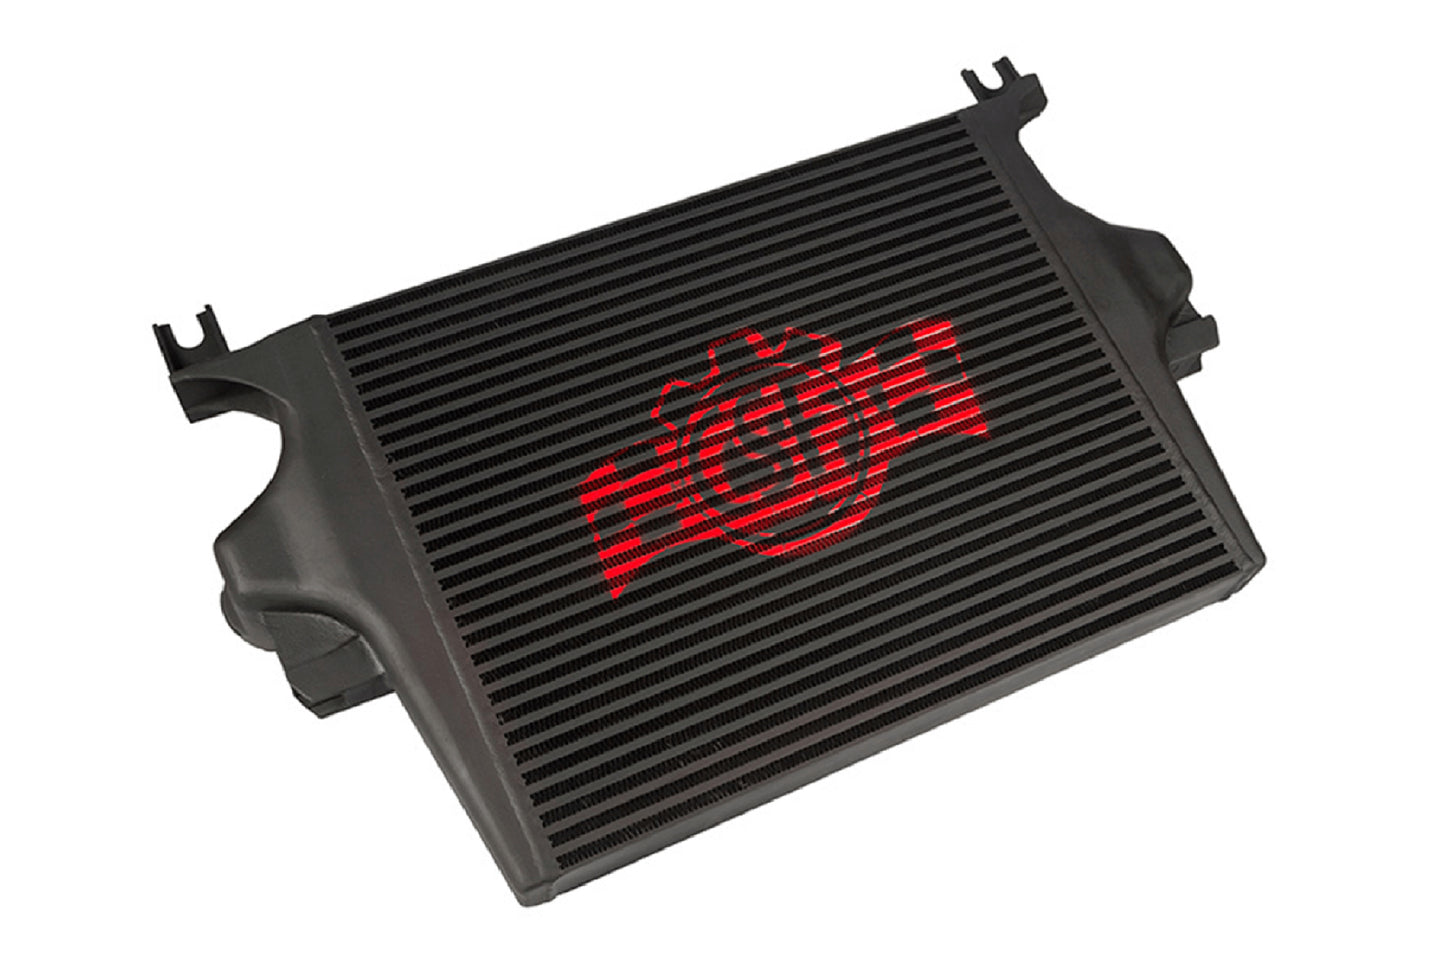 CSF Cooling - Racing & High Performance Division - 7107 - Intercooler - 99-03 Ford Super Duty 7.3L Turbo Diesel Heavy Duty Intercooler - P/N: 7107